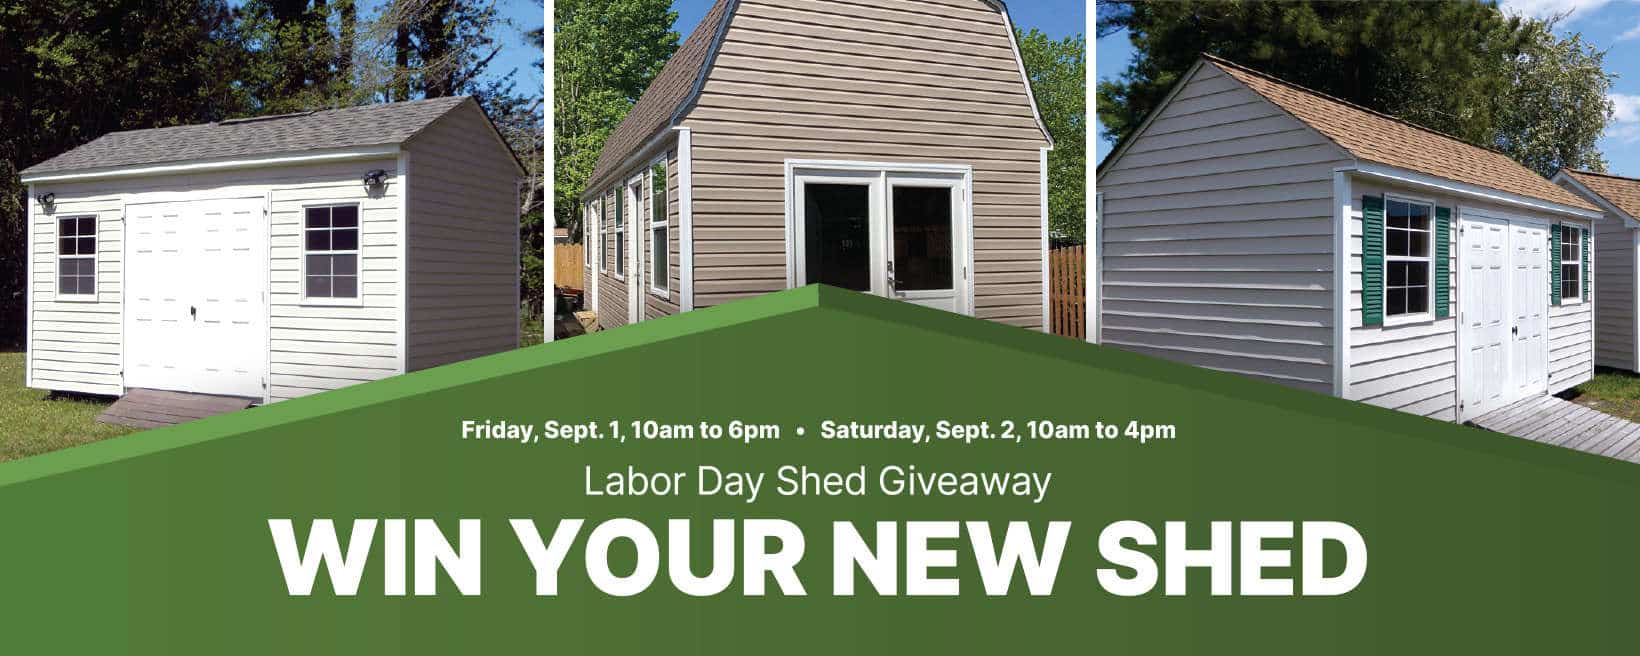 Win Your New Shed